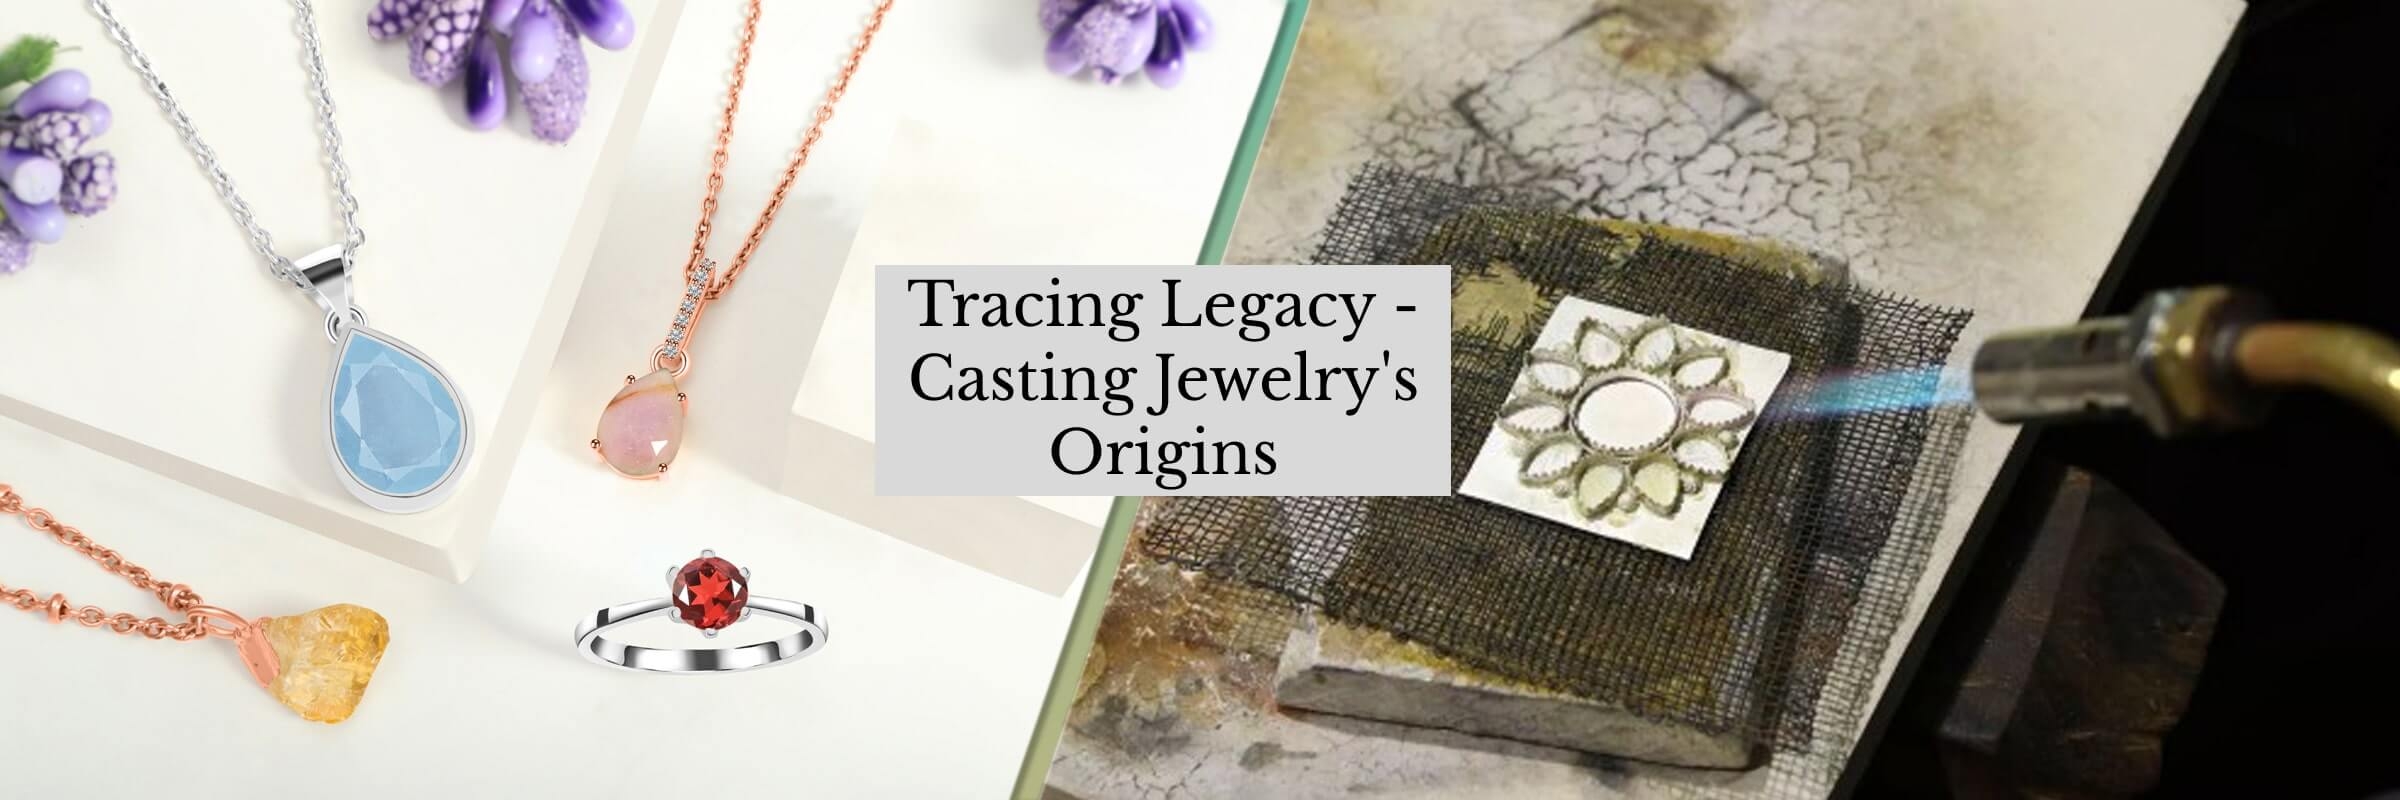 History of Casting Jewelry